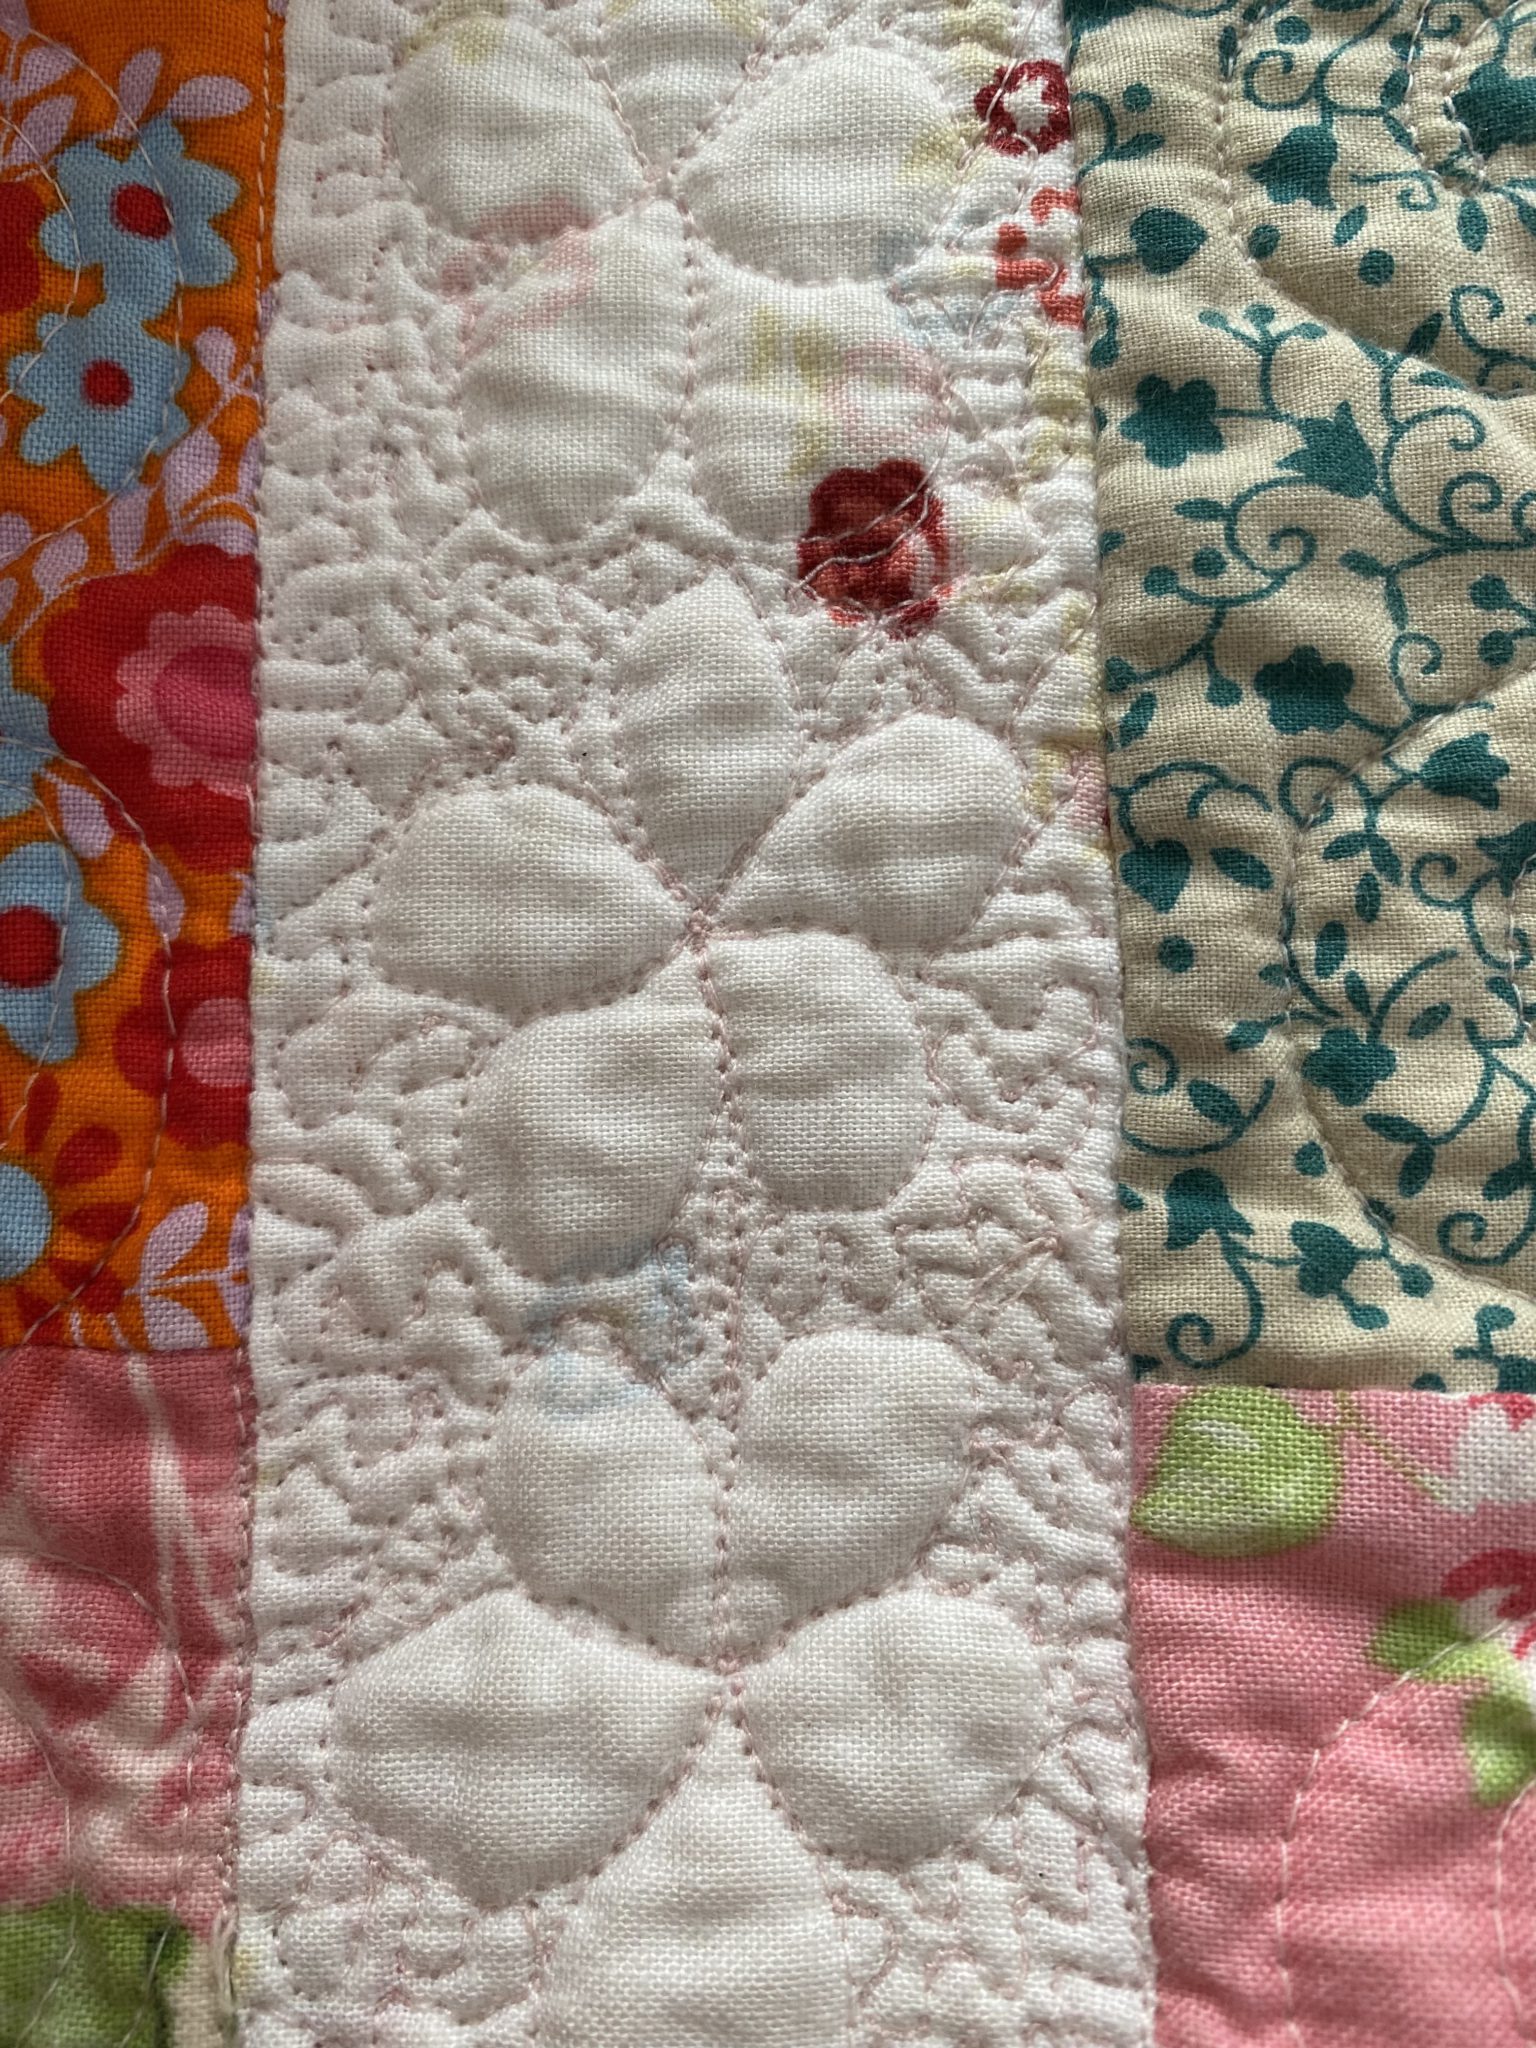 Free Motion Quilting Puffed Daisies
susies-scraps.com